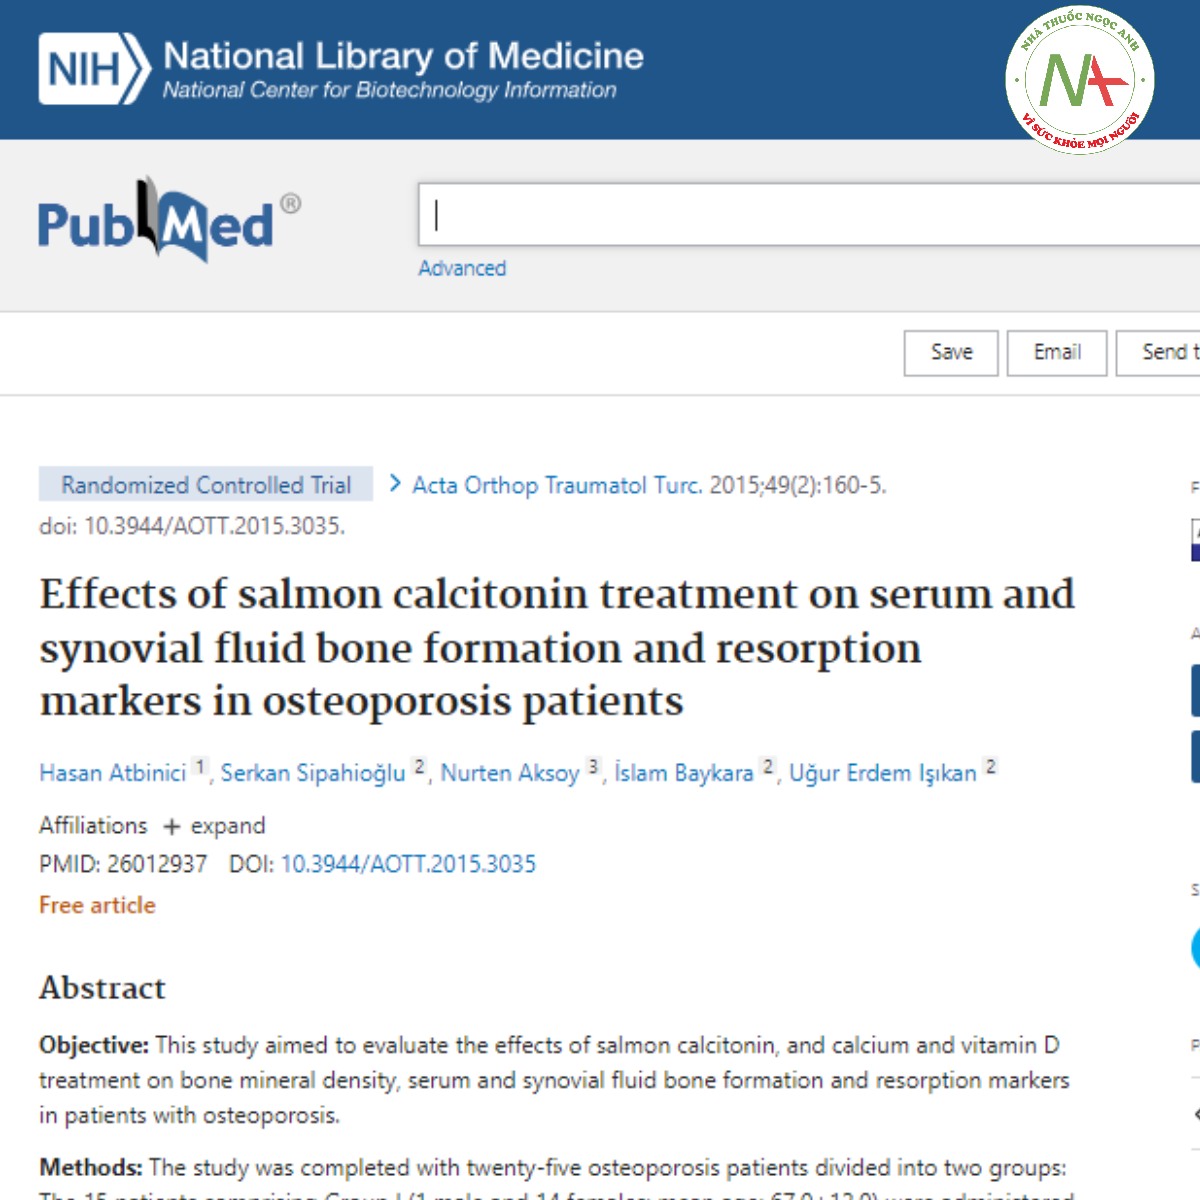 Effects of salmon calcitonin treatment on serum and synovial fluid bone formation and resorption markers in osteoporosis patients